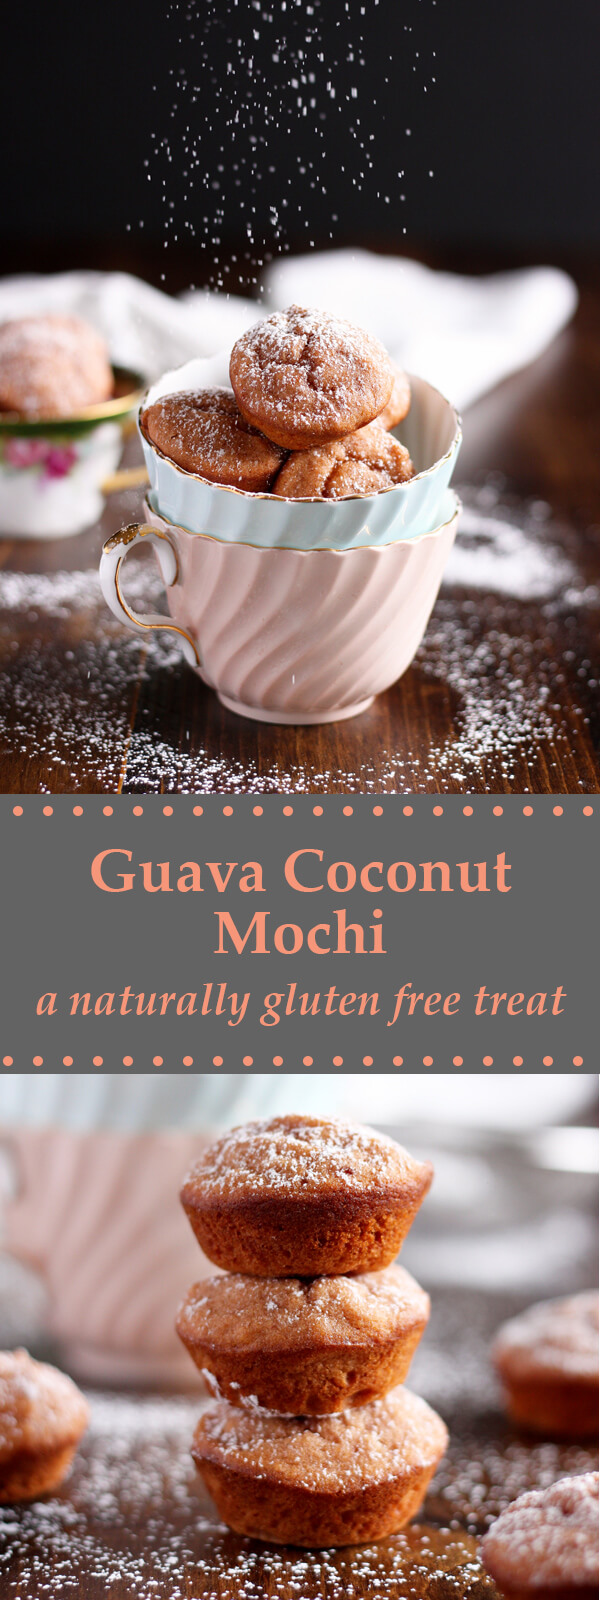 These cute little Guava Coconut Mochi are chewy and bursting with guava flavor. And as a bonus, they are naturally gluten free! | wildwildwhisk.com